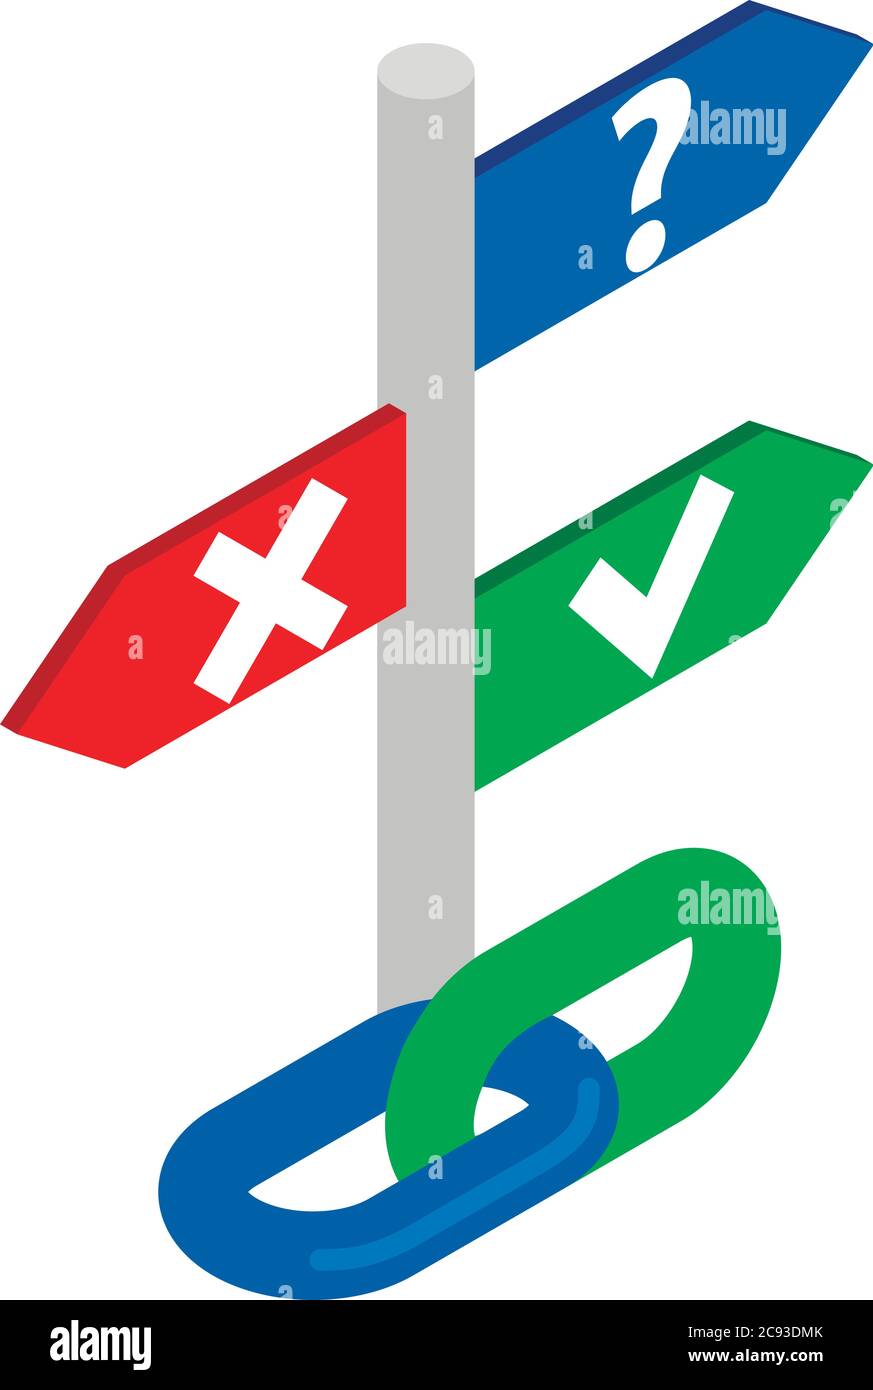 Link building icon, isometric style Stock Vector